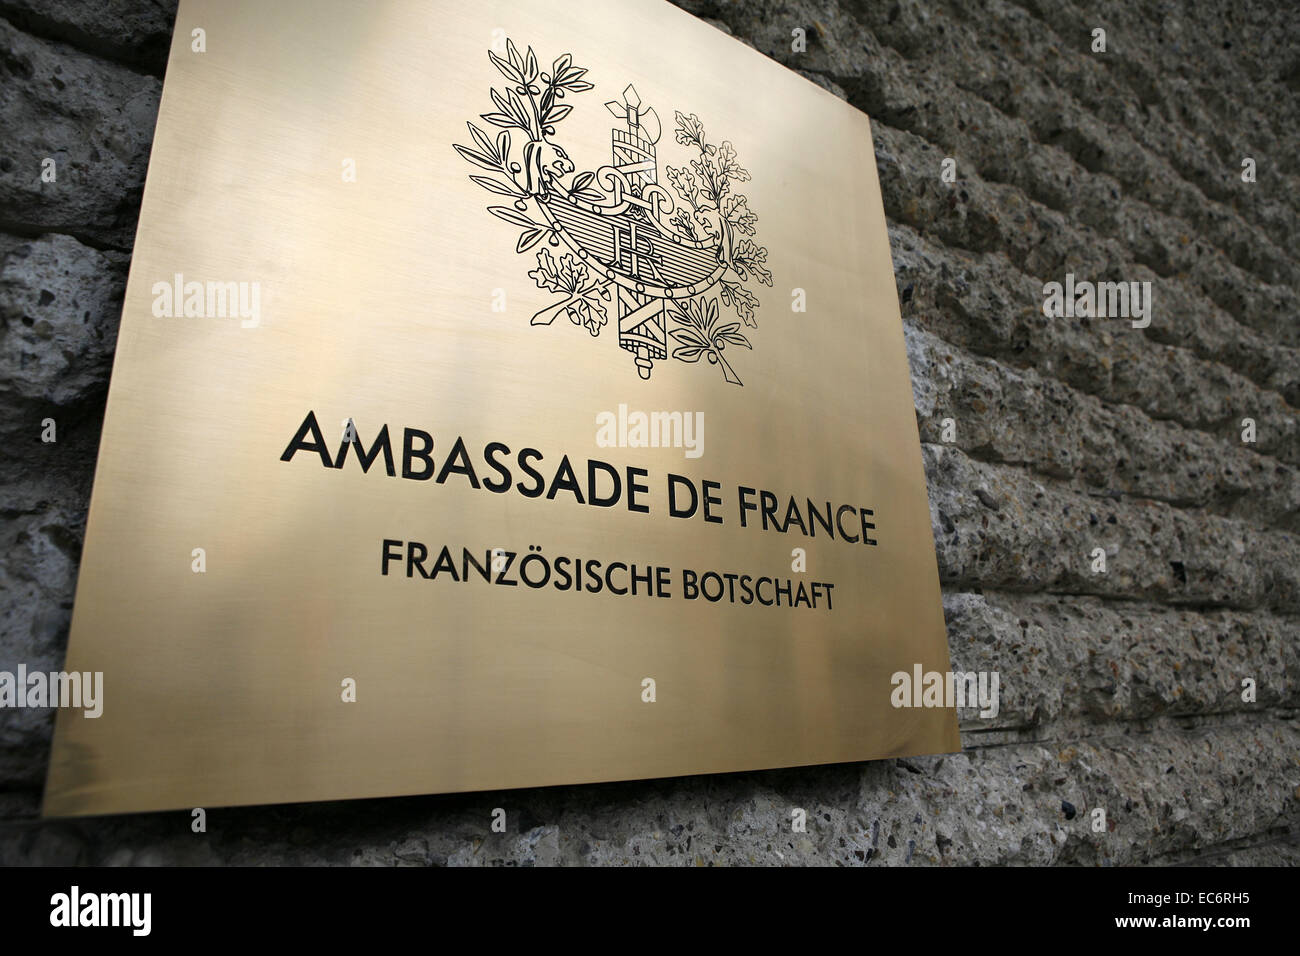 the word amp 39 ambassade de france amp 39 on metal plate at the french embassy amp 8203 amp 8203 pariser platz berlin germany Stock Photo